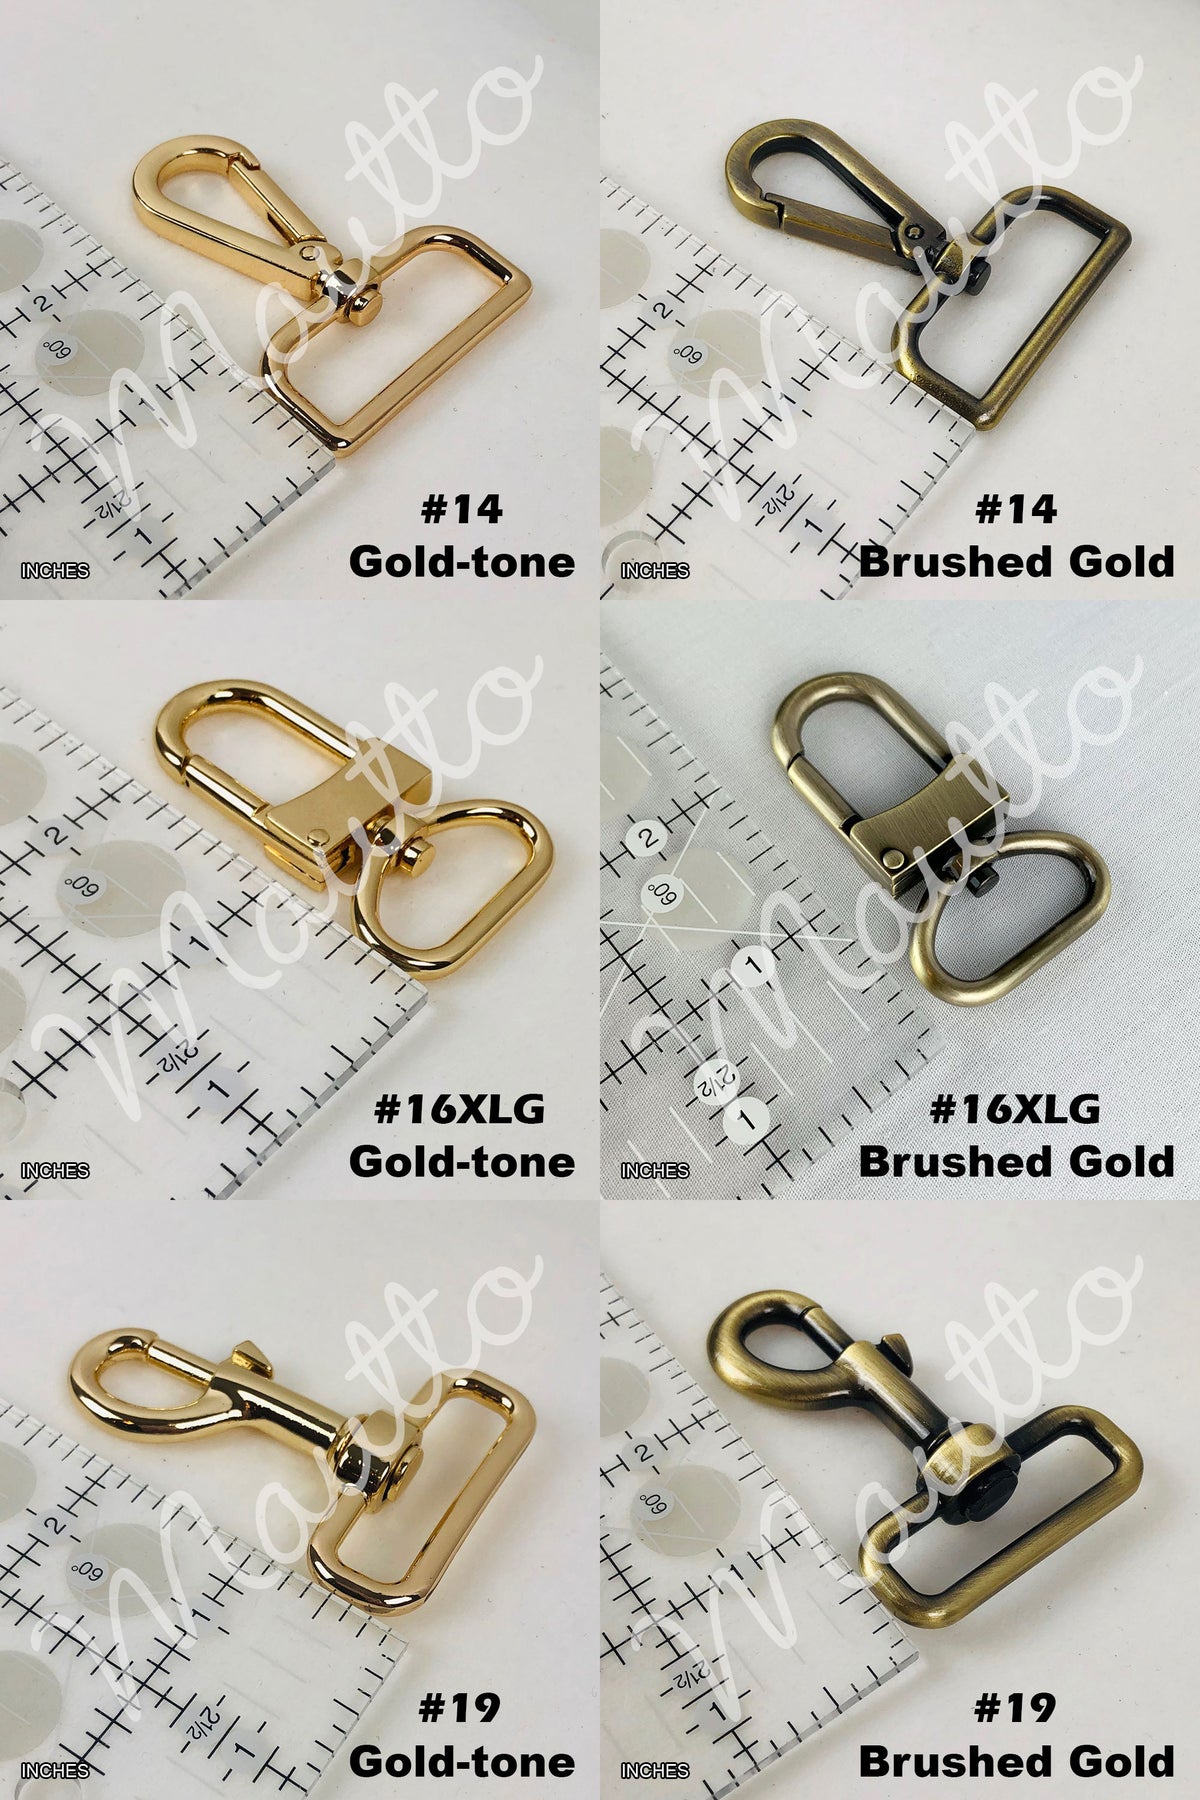 Cotton Canvas Strap - Adjustable - 1.5 Wide - Choose Color, Length & Gold  or Nickel #16XLG Hooks, Replacement Purse Straps & Handbag Accessories -  Leather, Chain & more